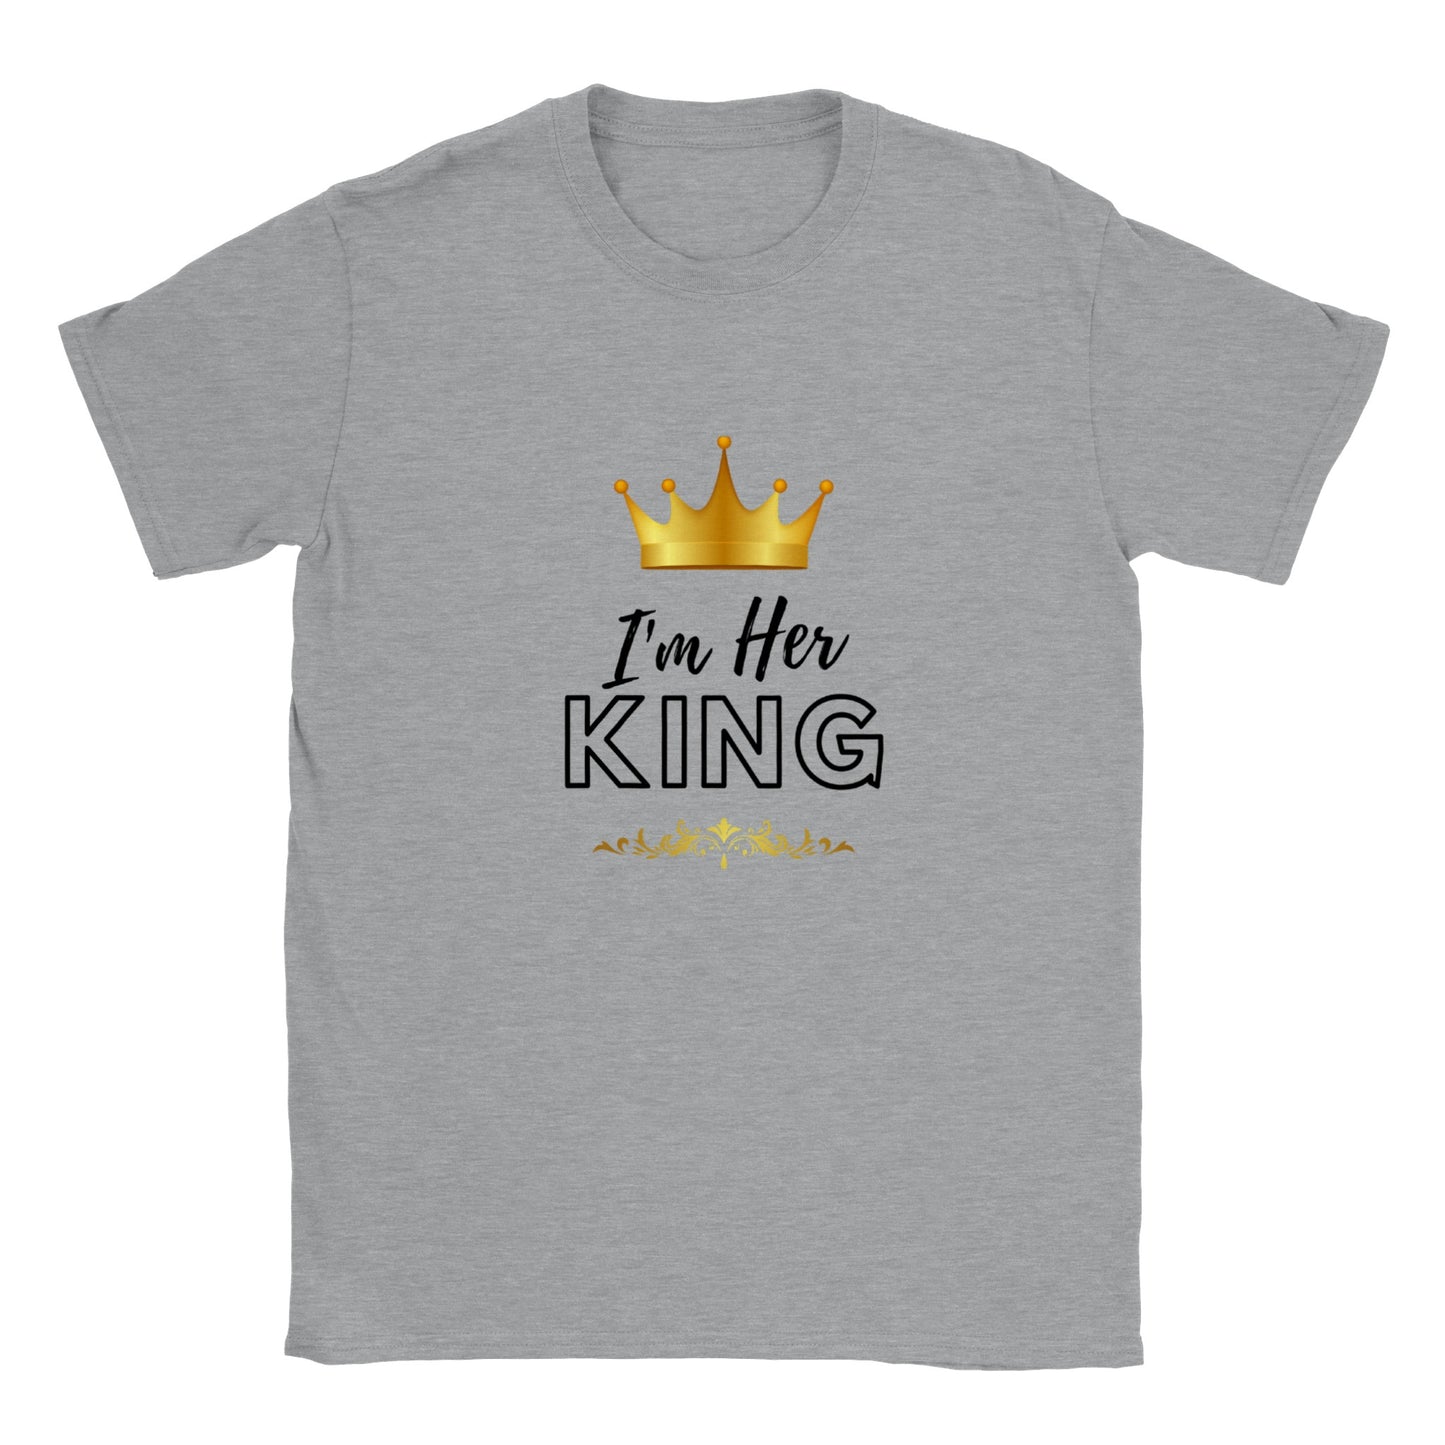 I'm Her King T-shirt